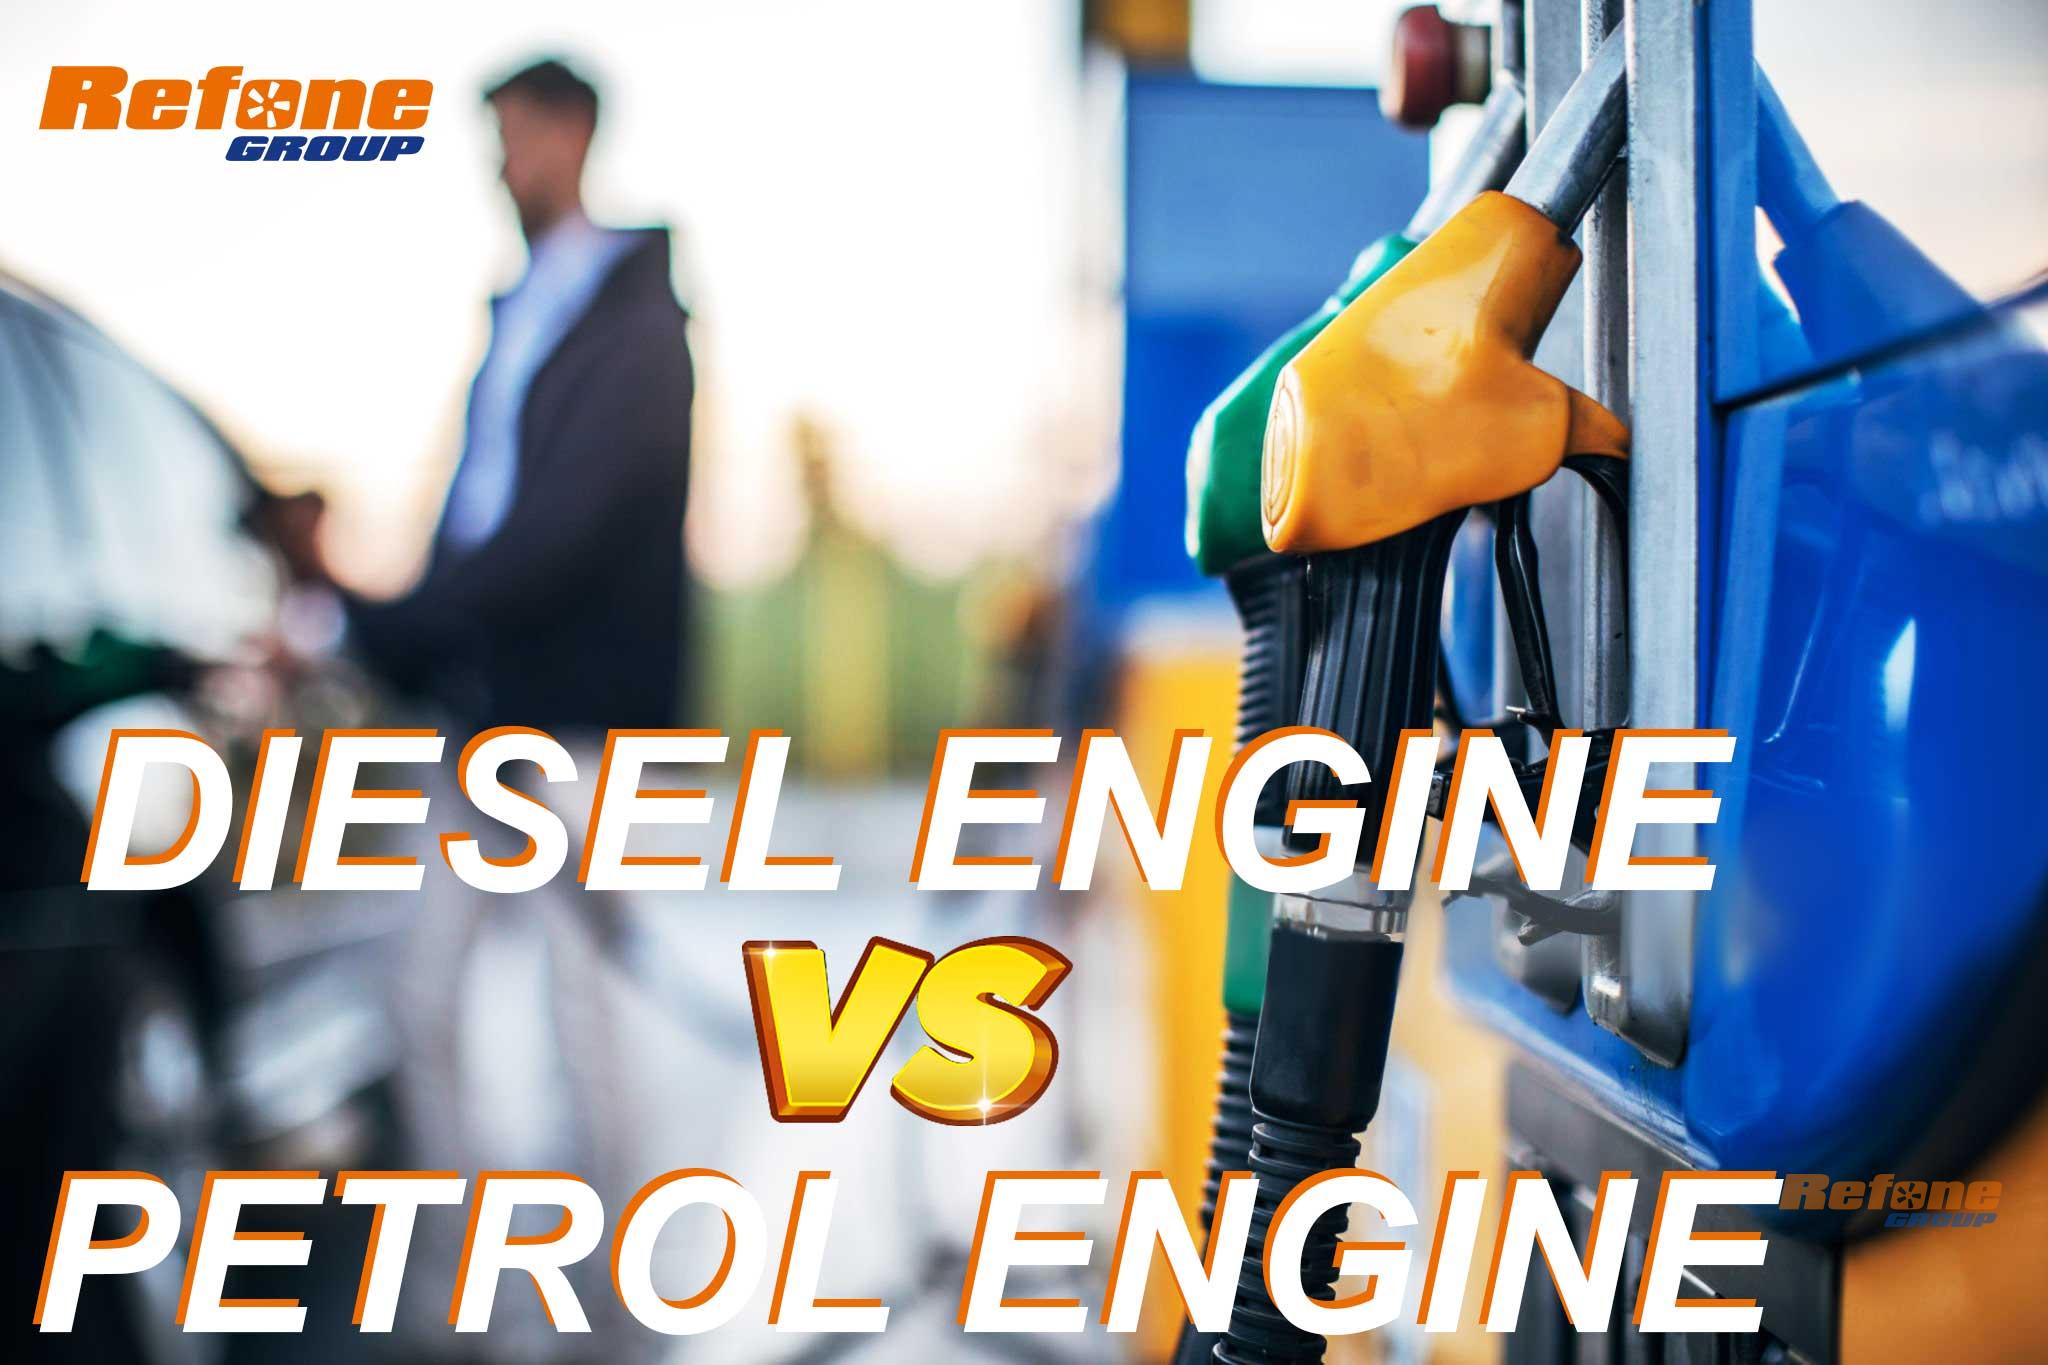 The differences between diesel and petrol engines